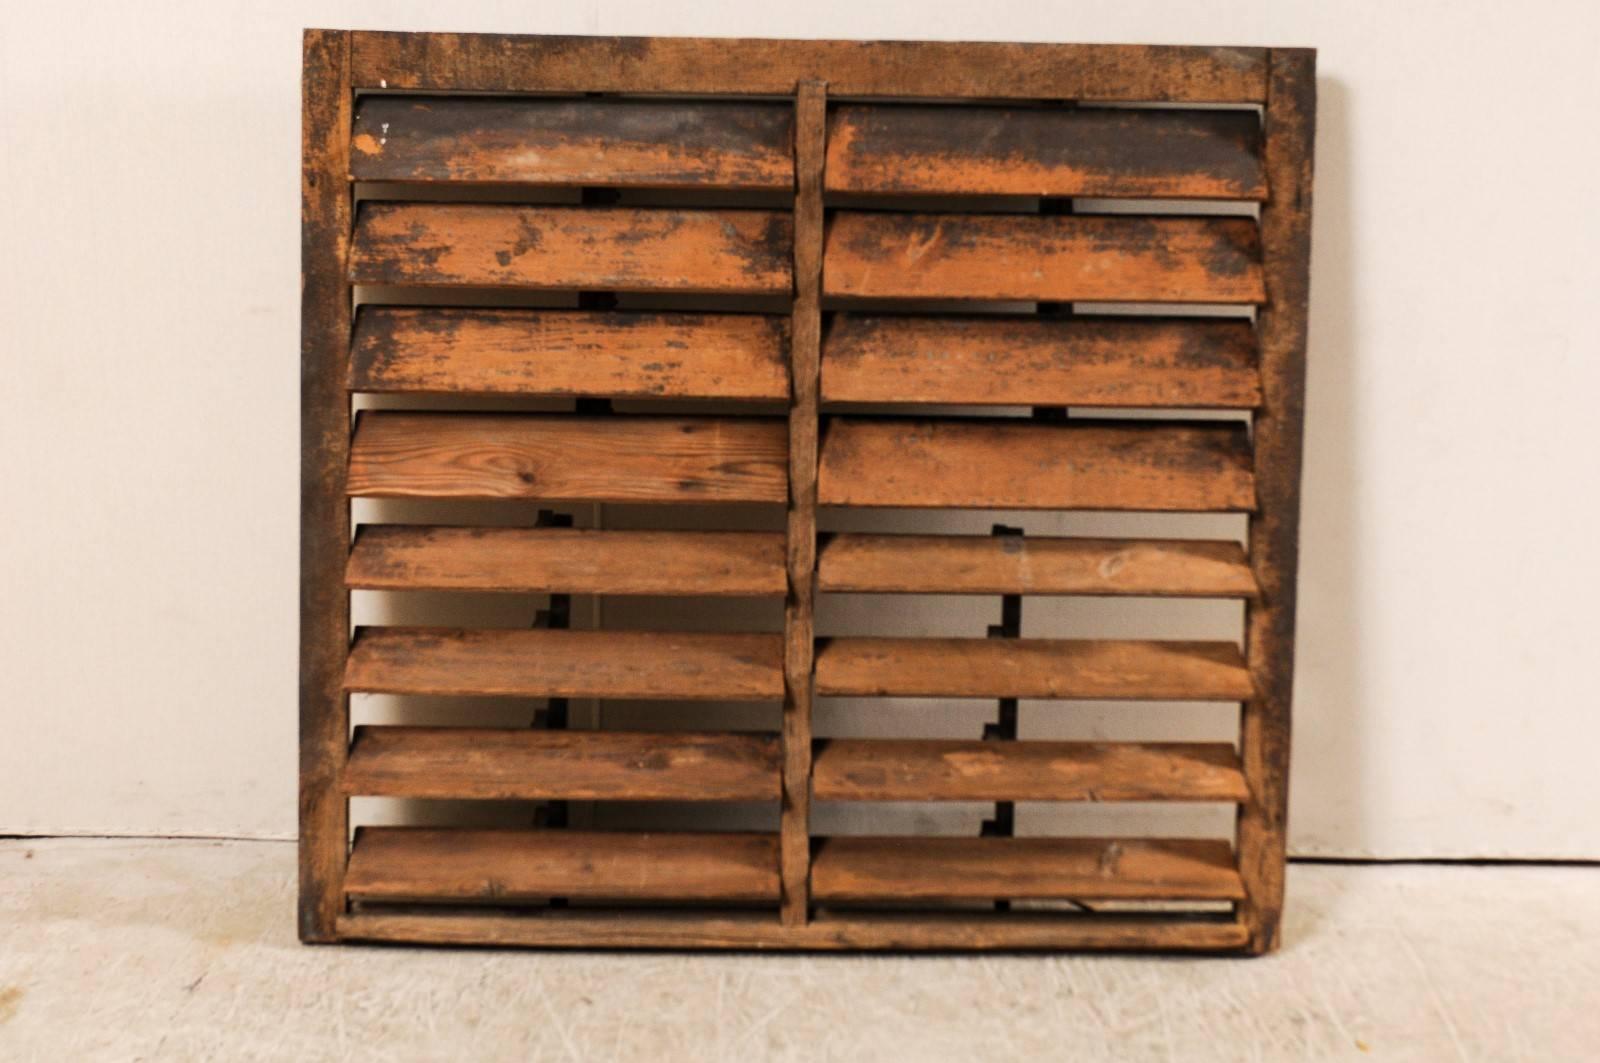 A vintage American large-size rustic wooden shutter. This vintage wooden shutter has a nice distressed look with beautifully aged wood finish that would add a rustic touch to any environment. Wooden louvers on the backside open and close to your